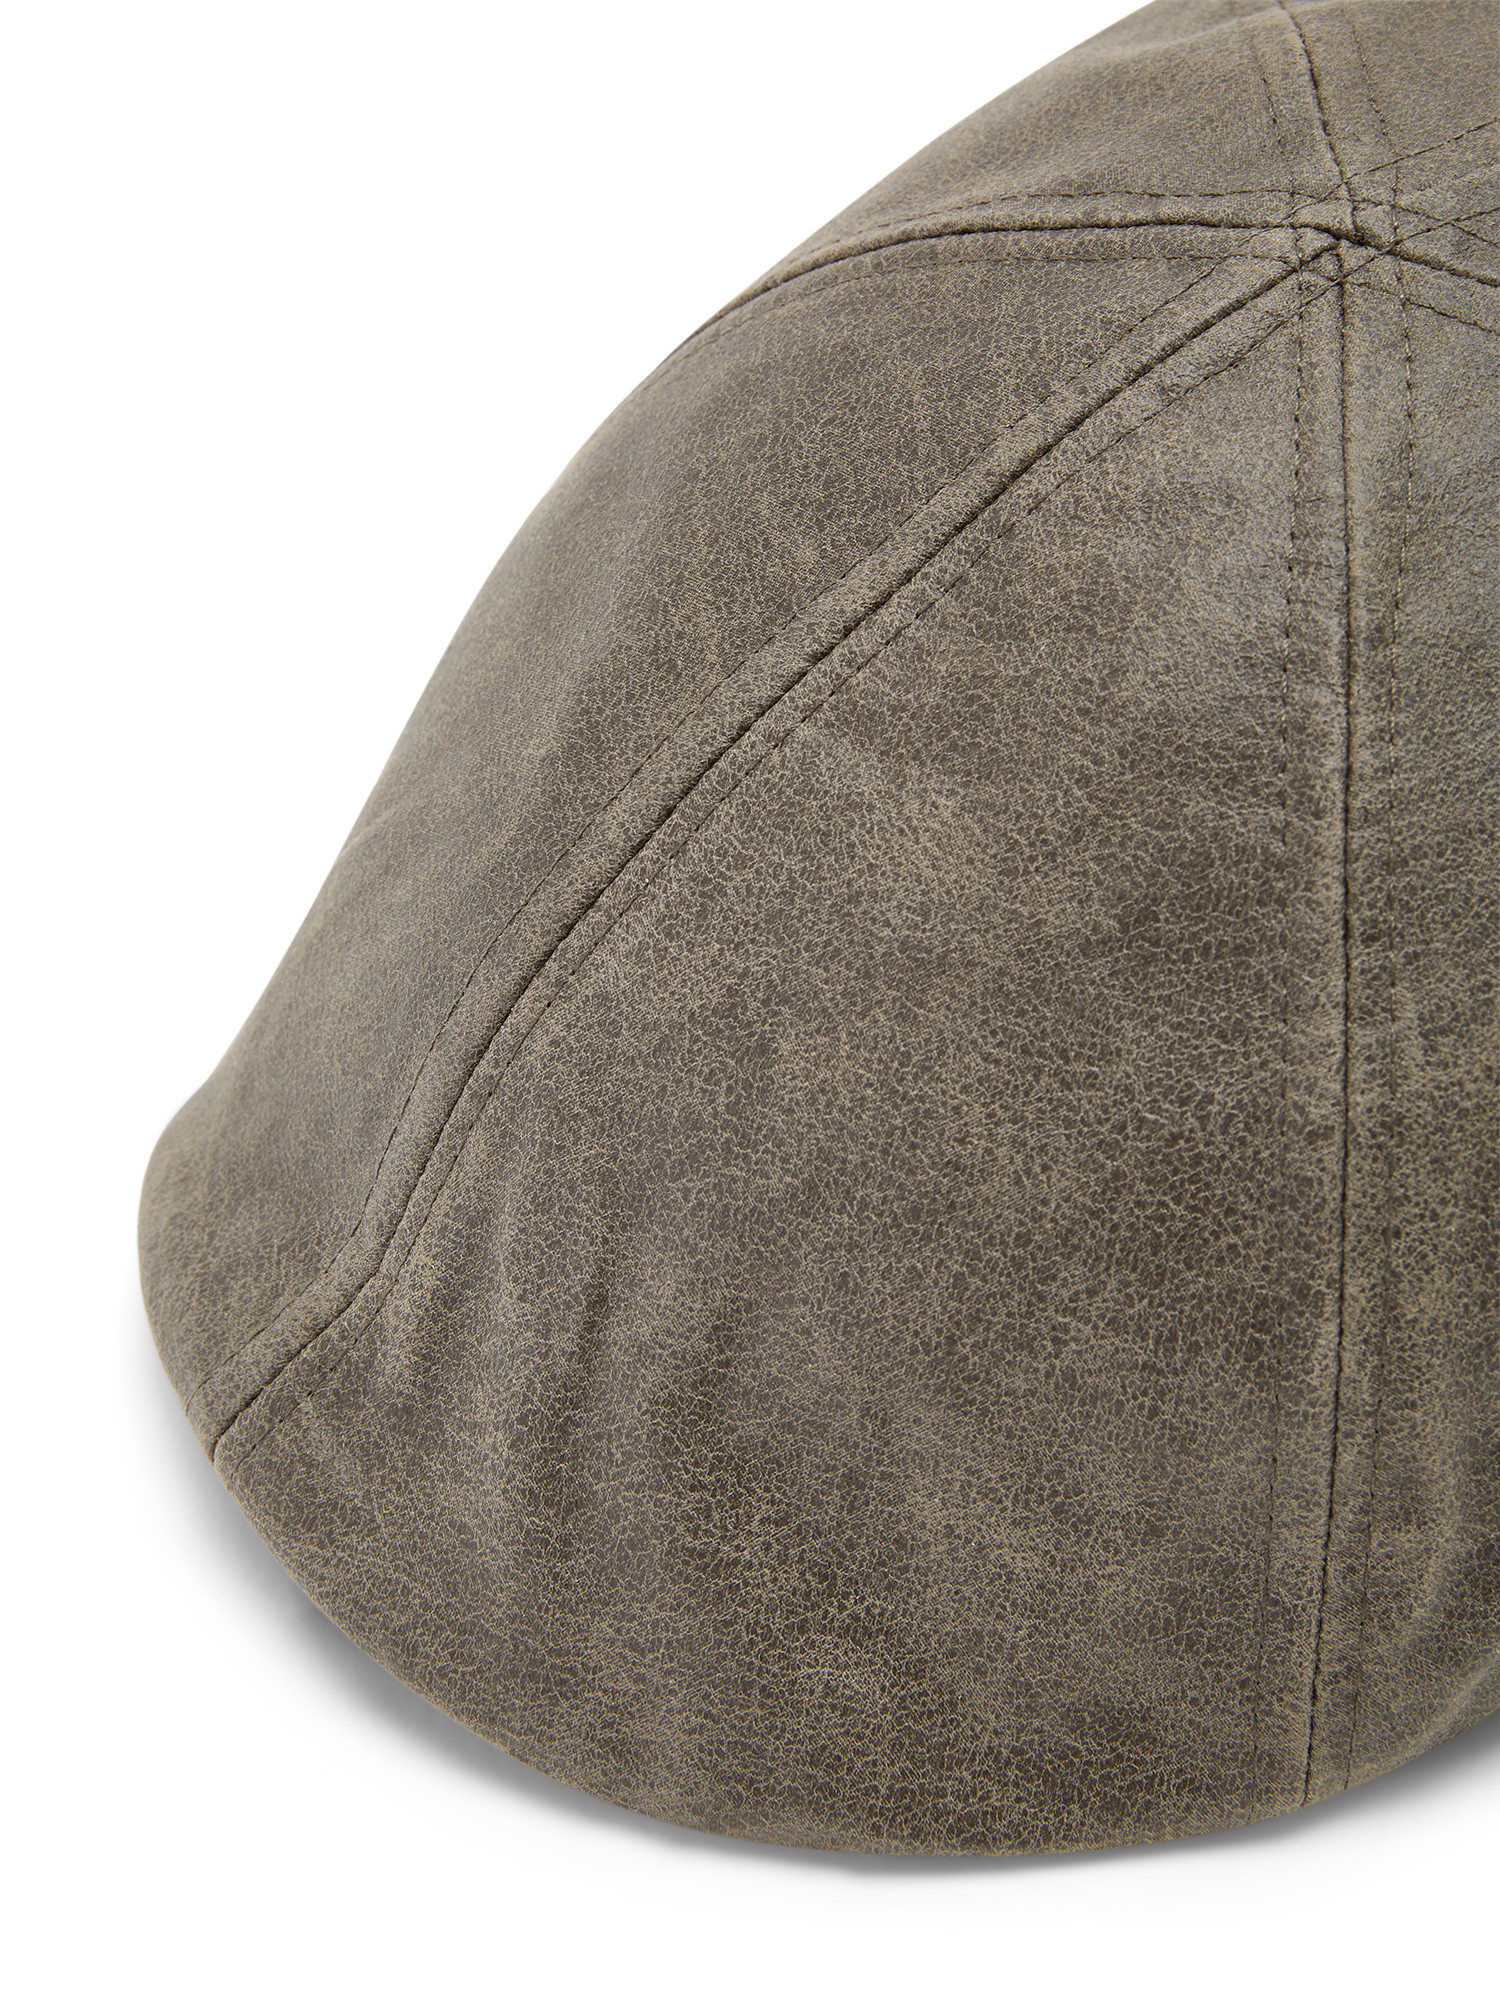 Luca D'Altieri - Synthetic cap, Olive Green, large image number 1